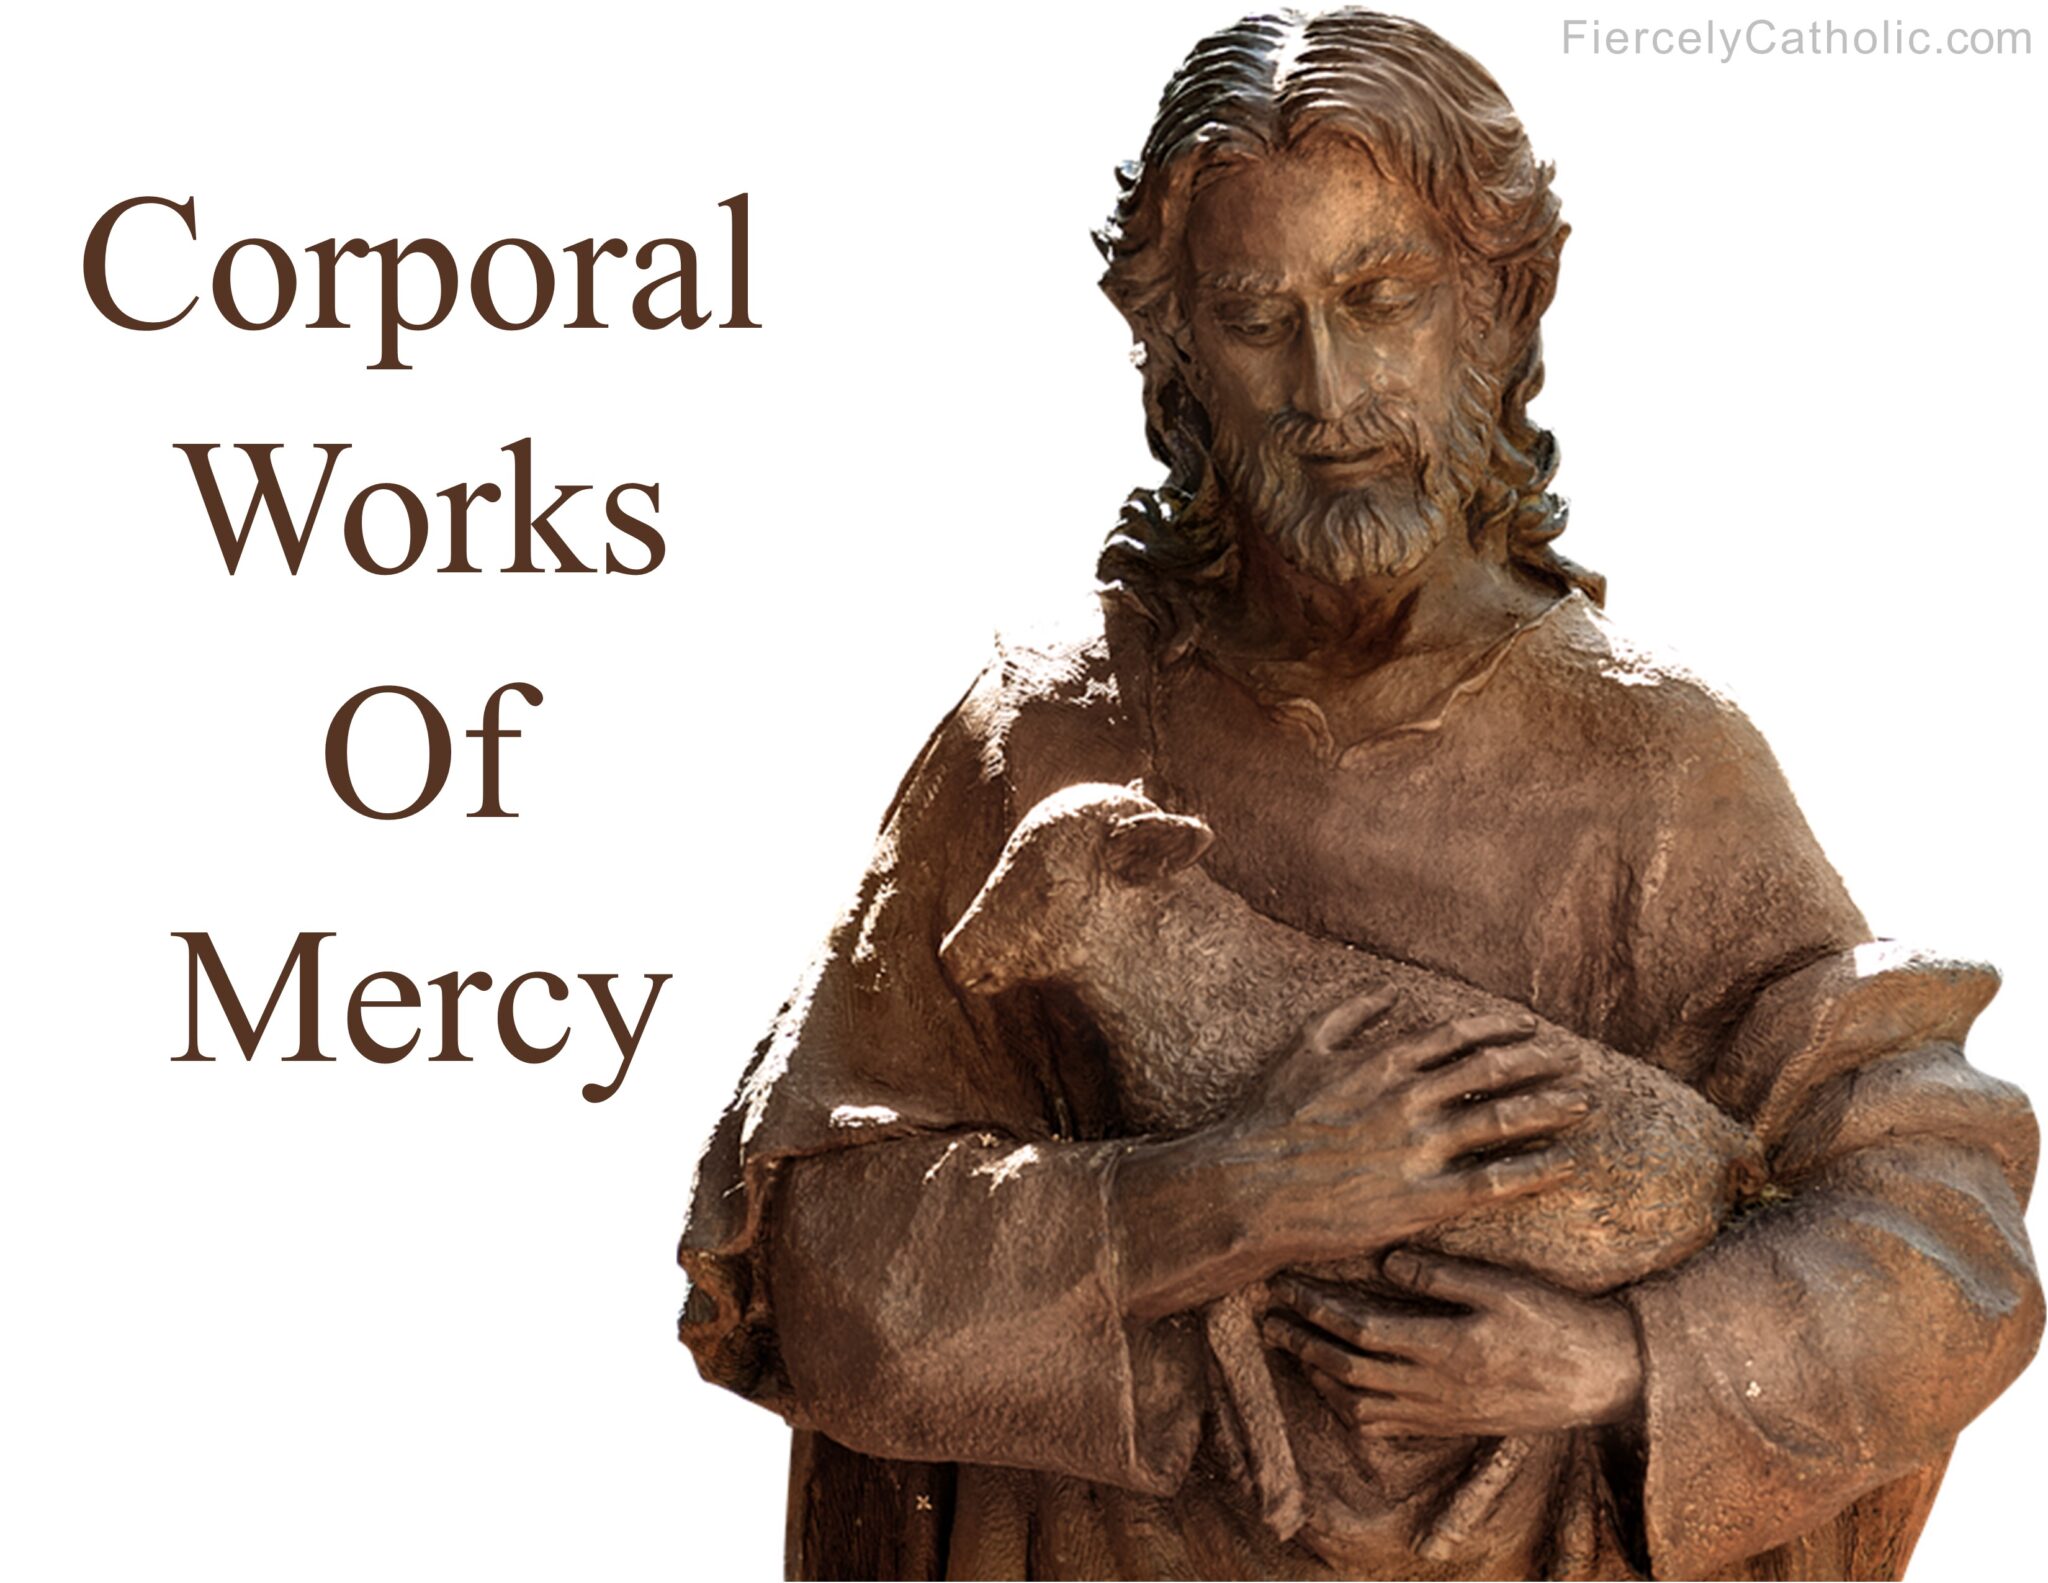 corporal-works-of-mercy-fiercely-catholic